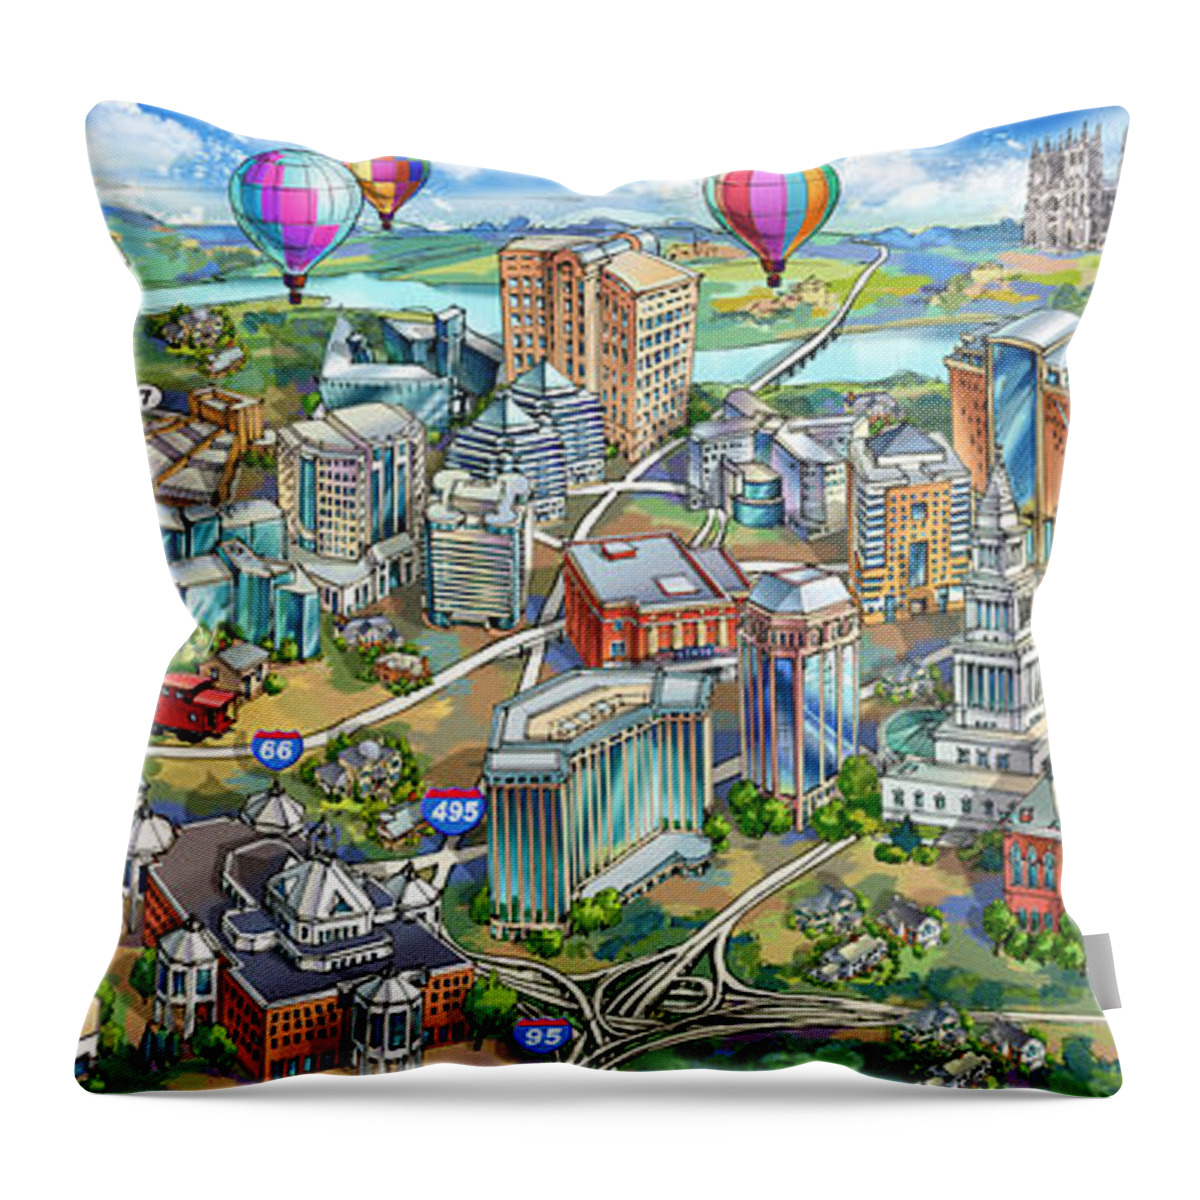 Northern Virginia Throw Pillow featuring the painting Northern Virginia Map Illustration by Maria Rabinky